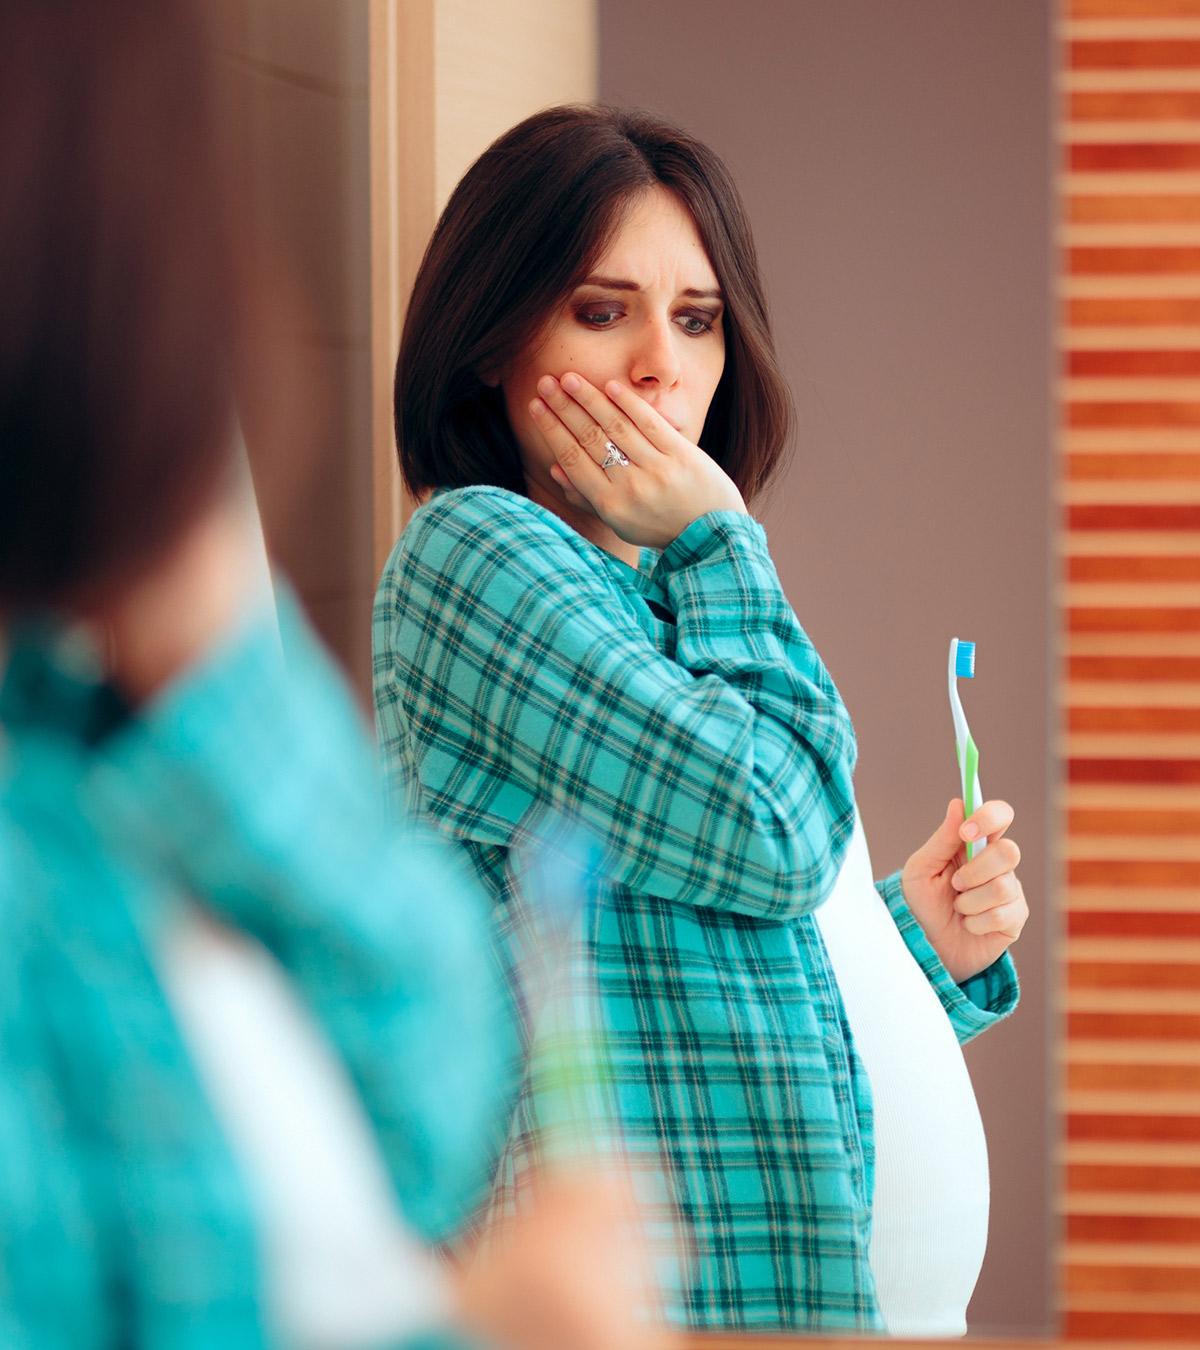 Bleeding Gums During Pregnancy: Signs, Causes & Treatment